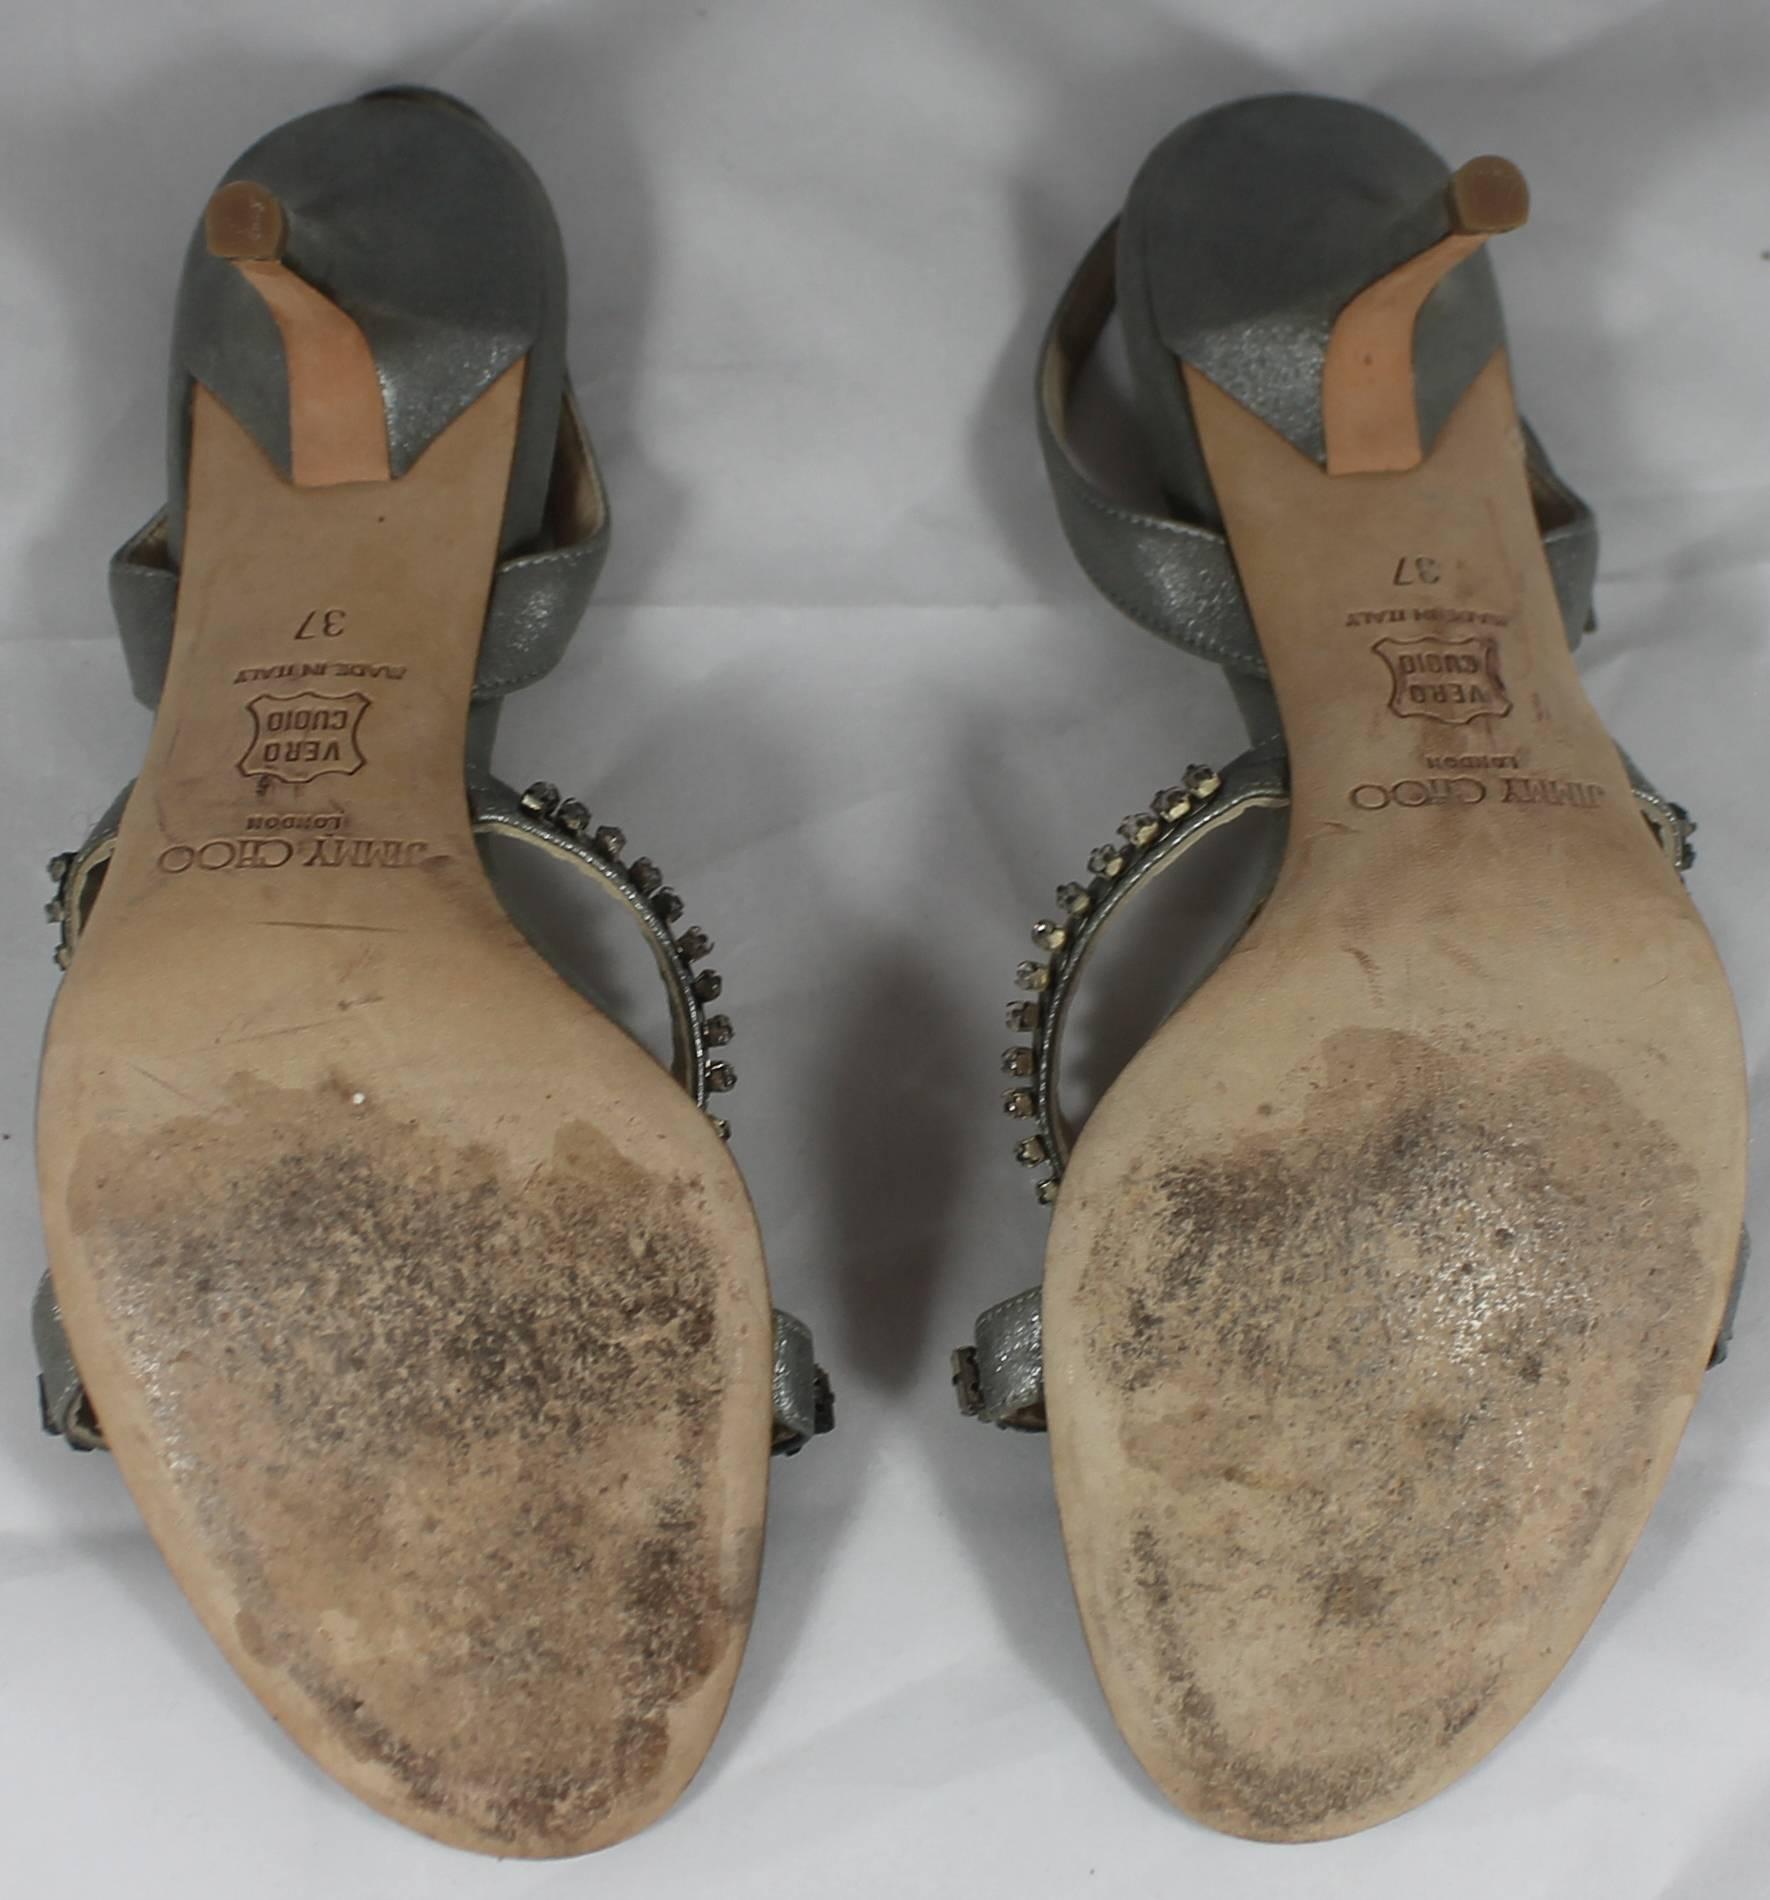 Jimmy Choo Shimmery Silver Slingback Heels with Bedazzlement - 37 In Good Condition For Sale In West Palm Beach, FL